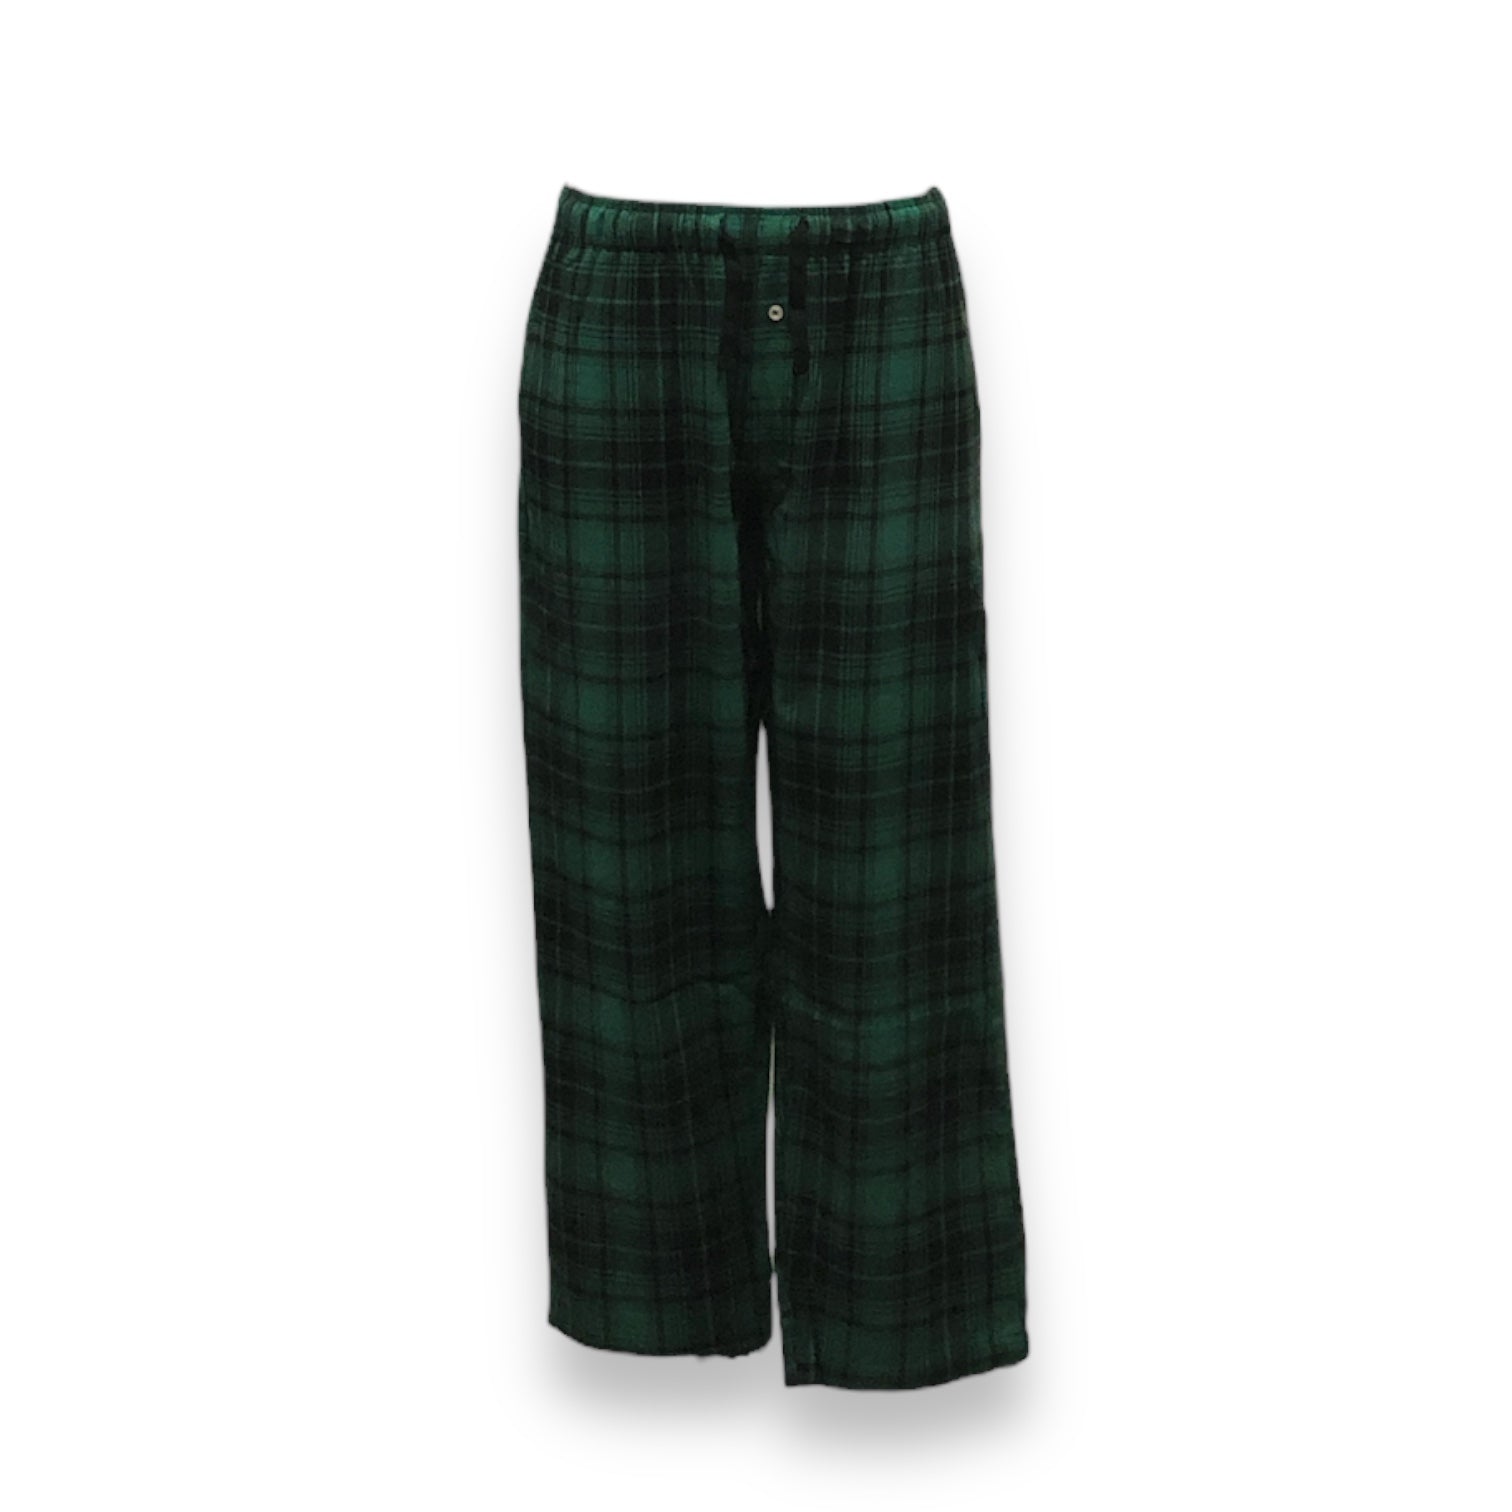 Men's 100% Cotton Flannel Sleep Pants with Pockets